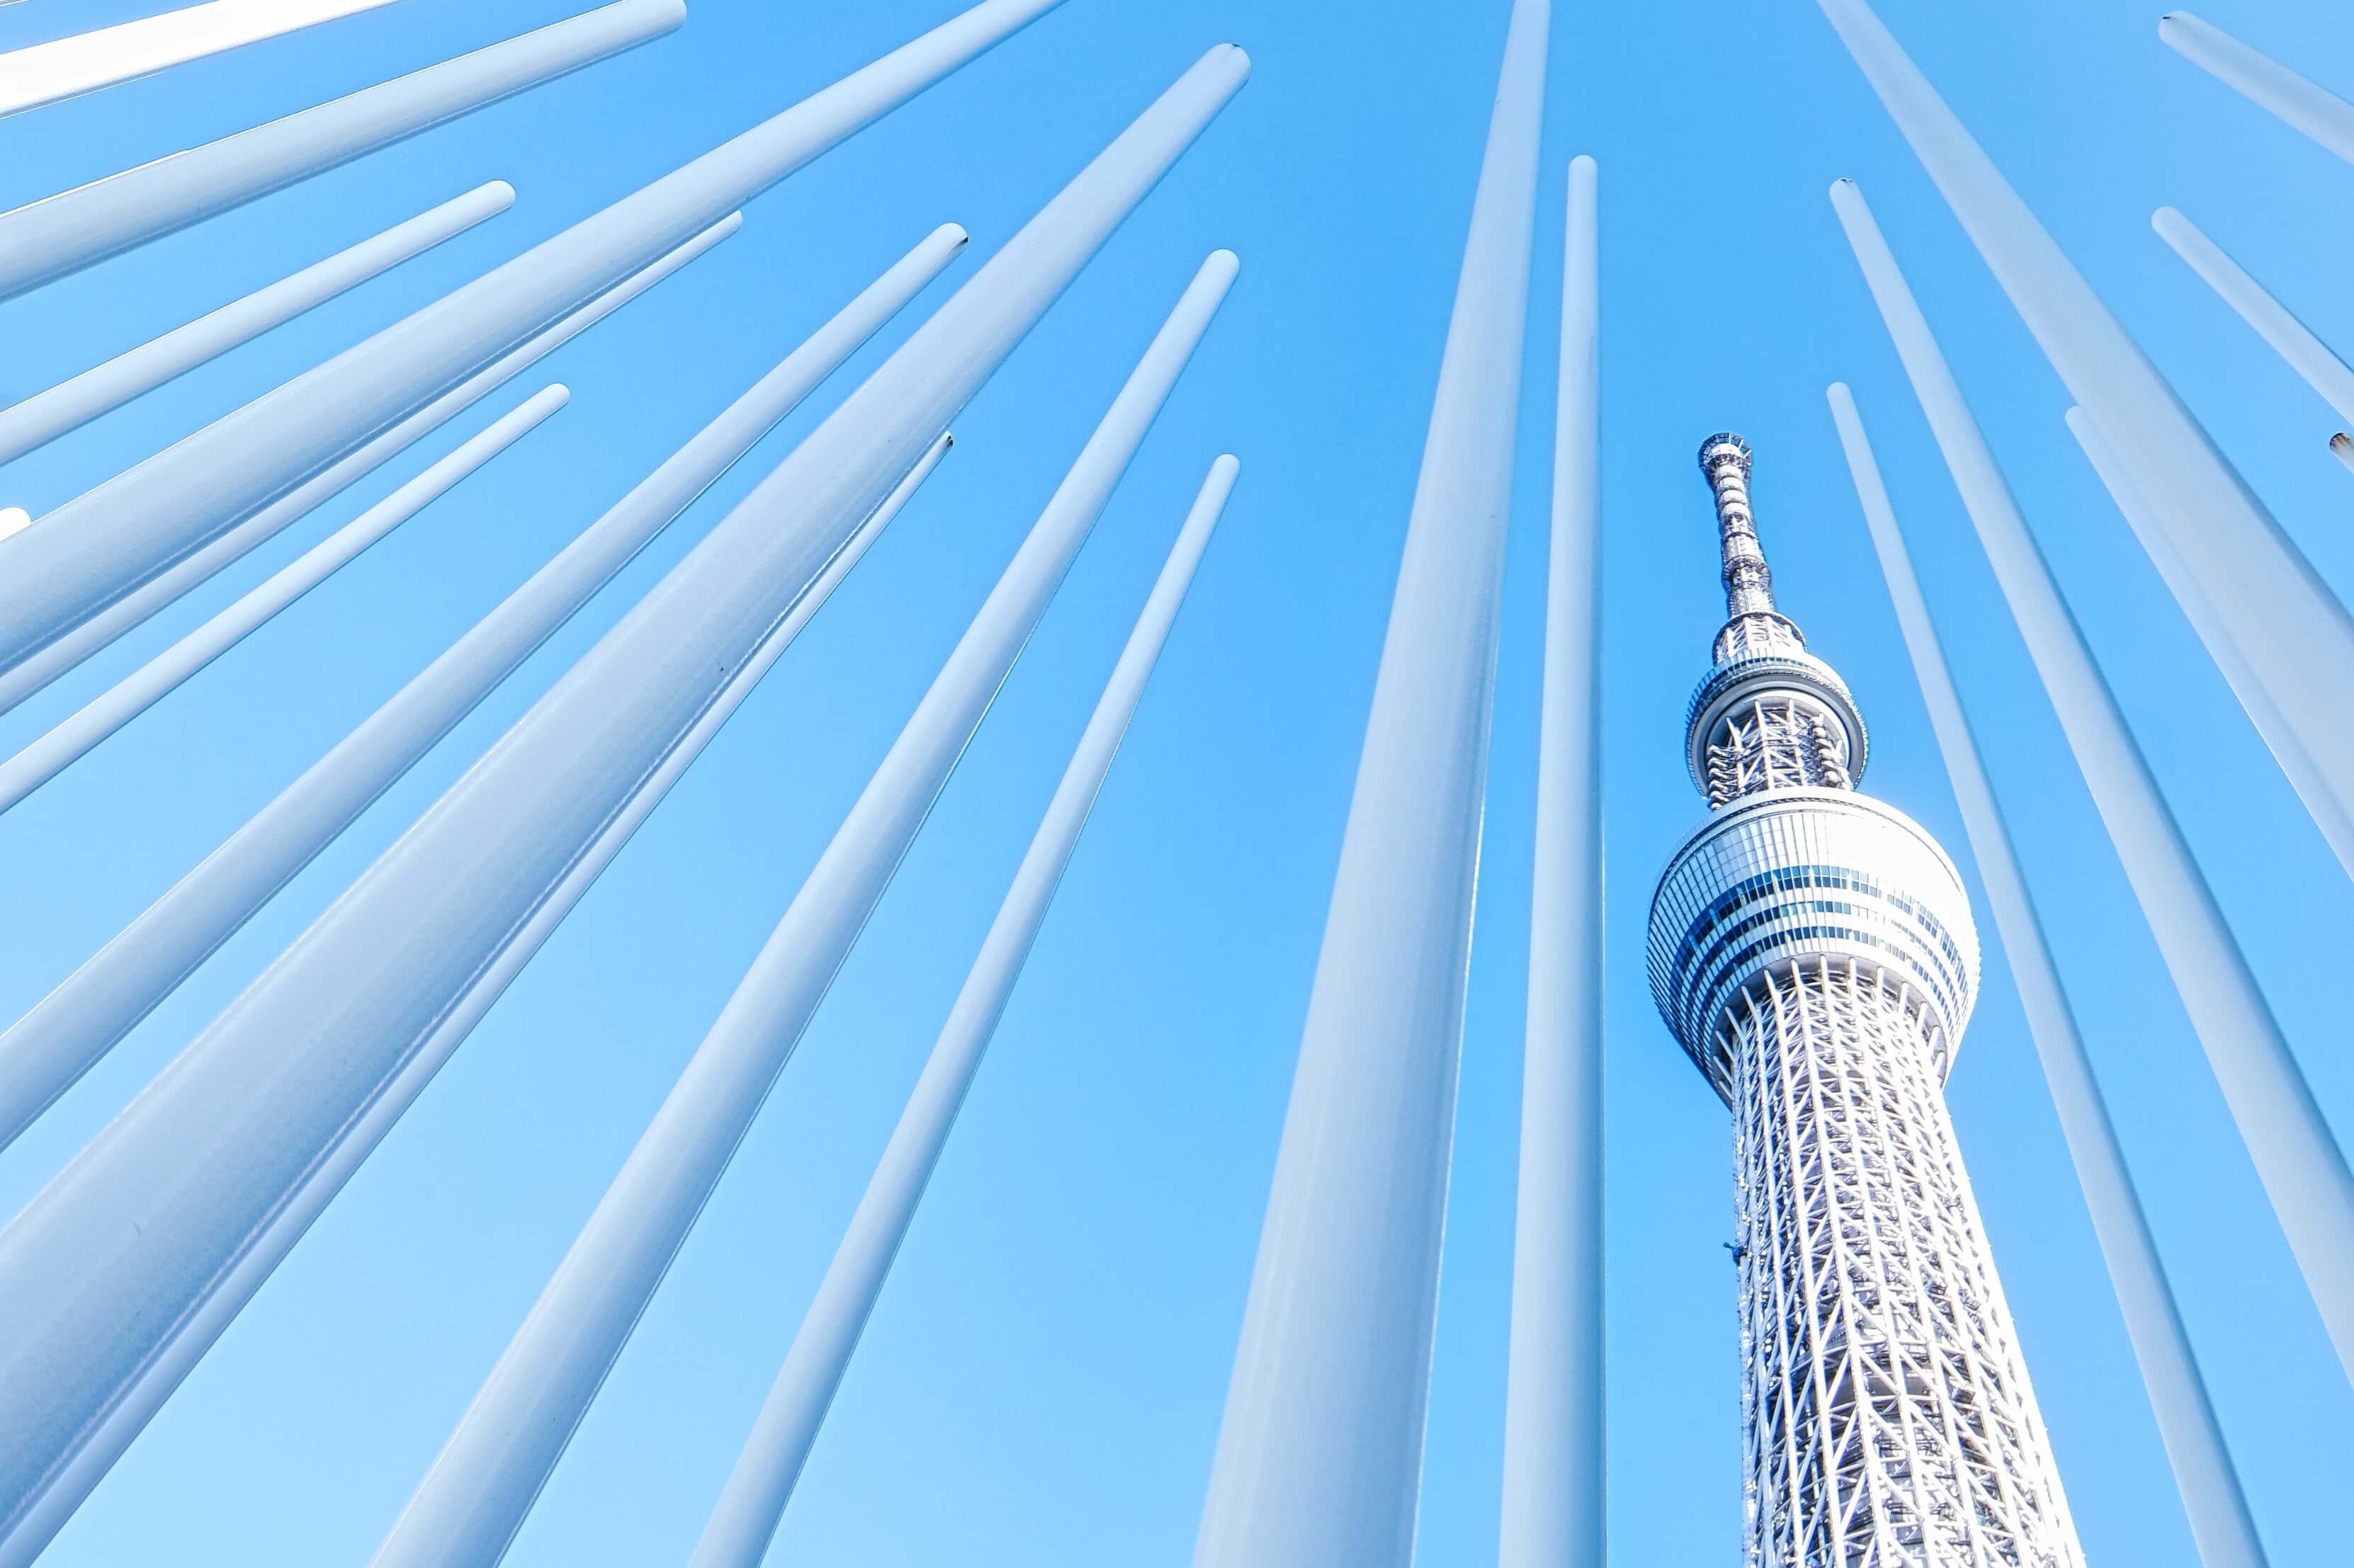 Tokyo Skytree: 10 Best and Secret Spots to Take a Picture guide book for photography in tokyo